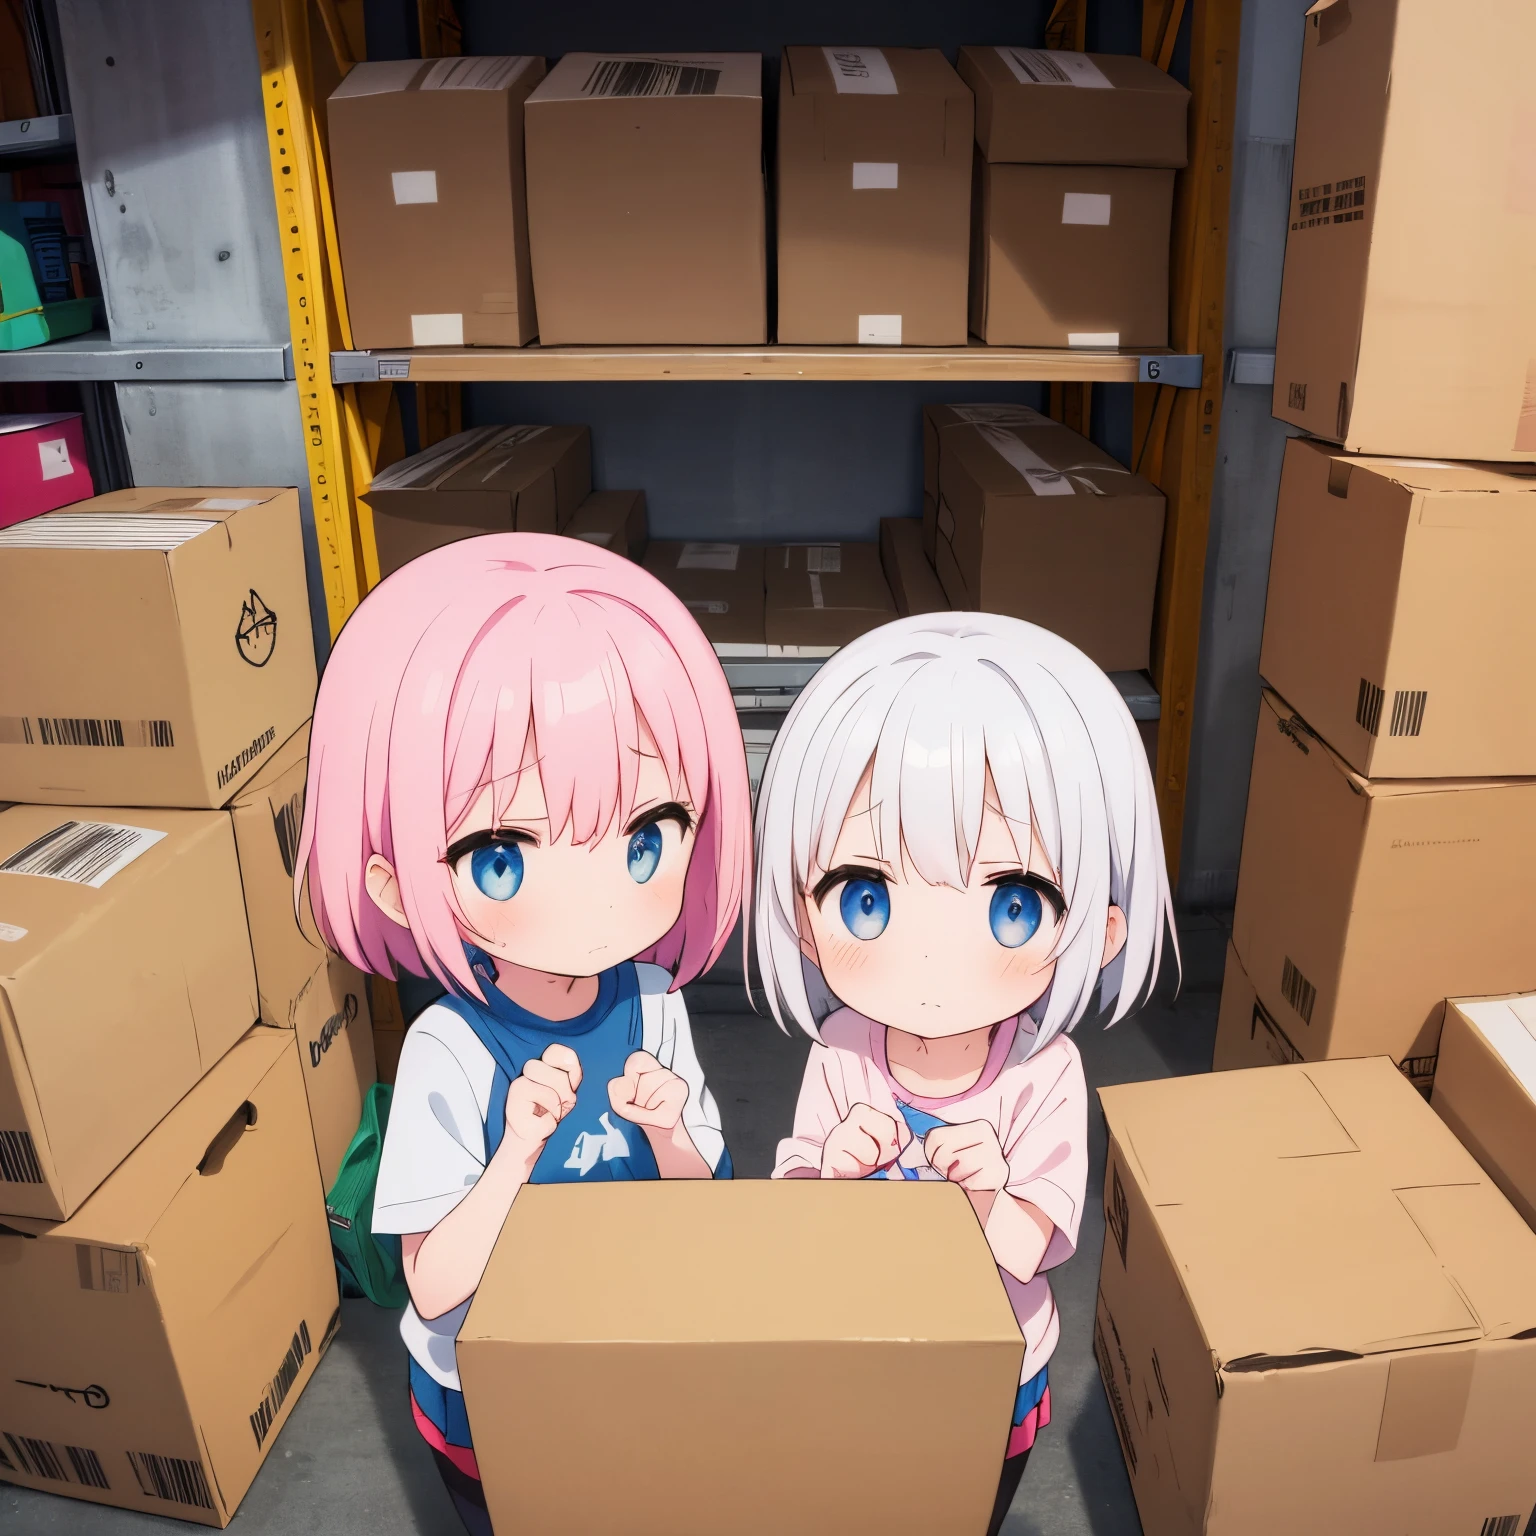 top-quality，in 8K，｛2 children｝｛2 elementary school students｝Full limbs，complete fingers，platinum pink short hair，in warehouse，｛large amount of cardboard boxes｝children with cardboard boxes，《Adorable face》，｛powerful emotions.｝